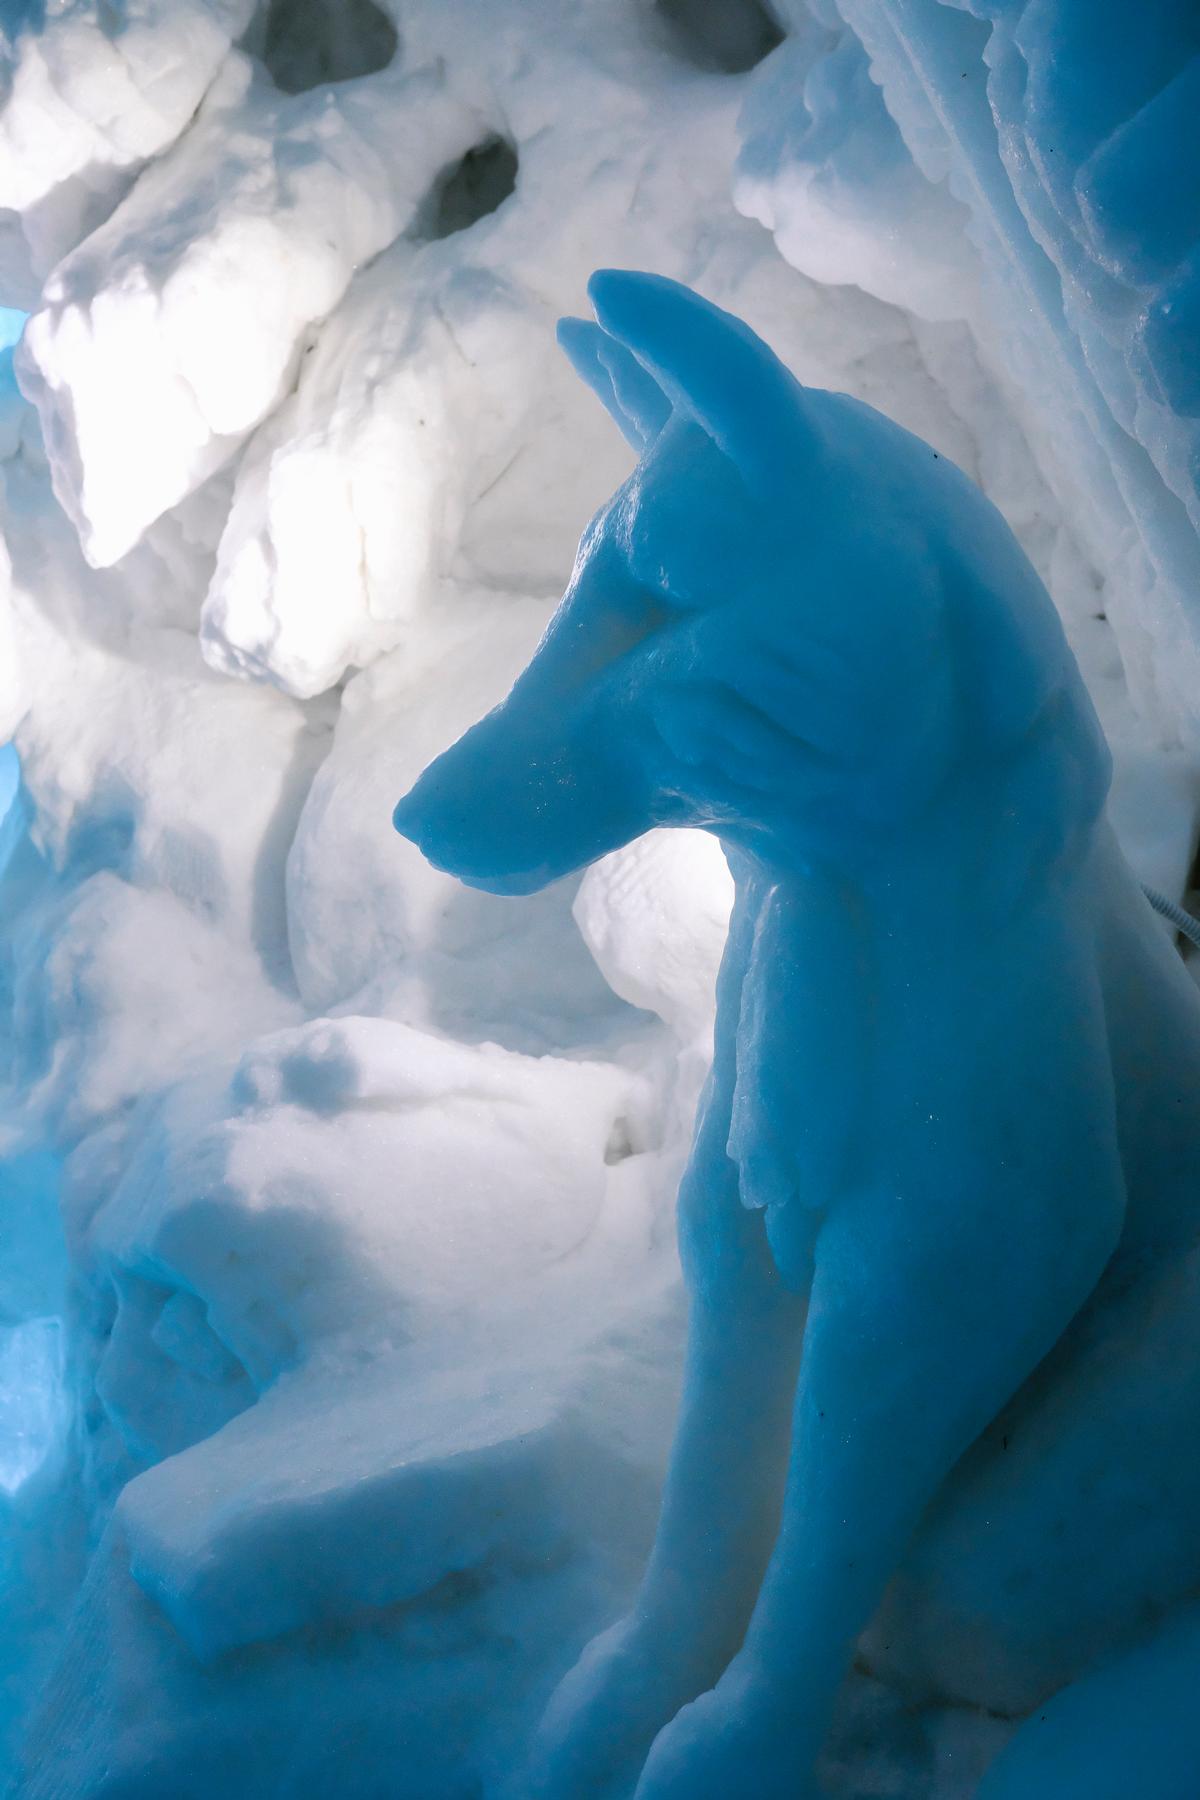 Rooms feature hand-sculpted ice works of art / © Renaud Philippe